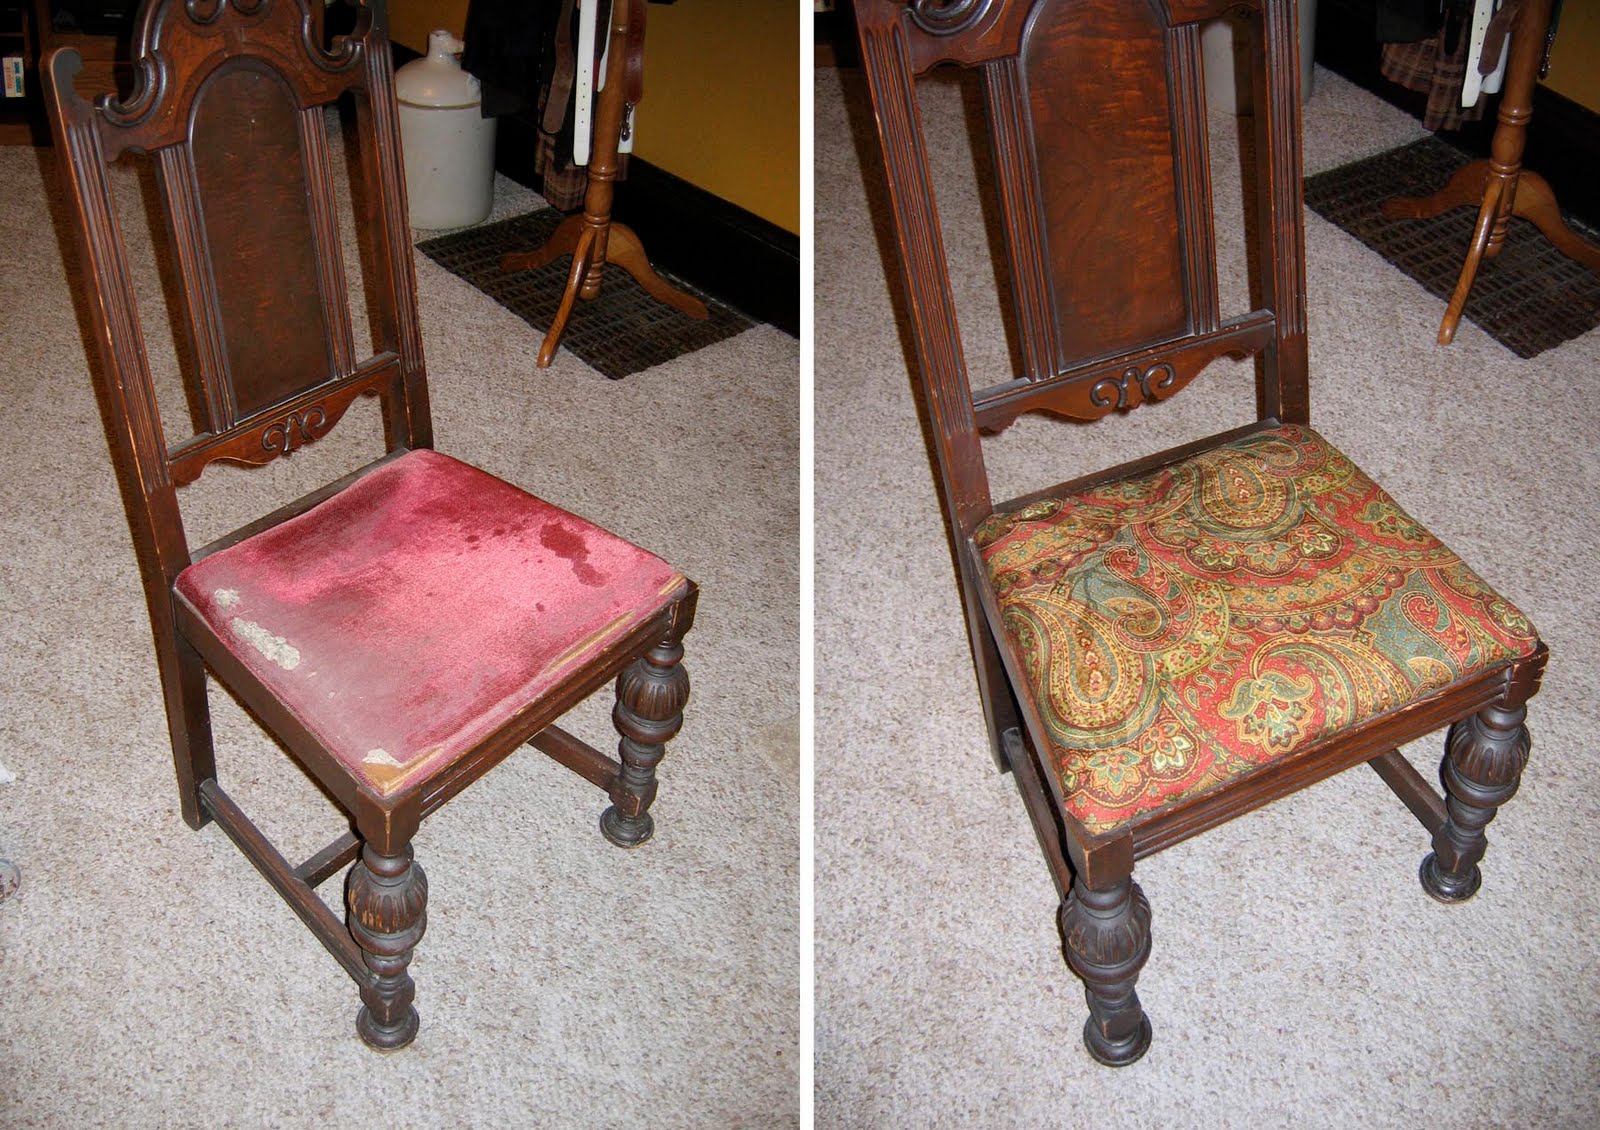 How to Reupholster a Chair (and Give Your Kitchen a New Look